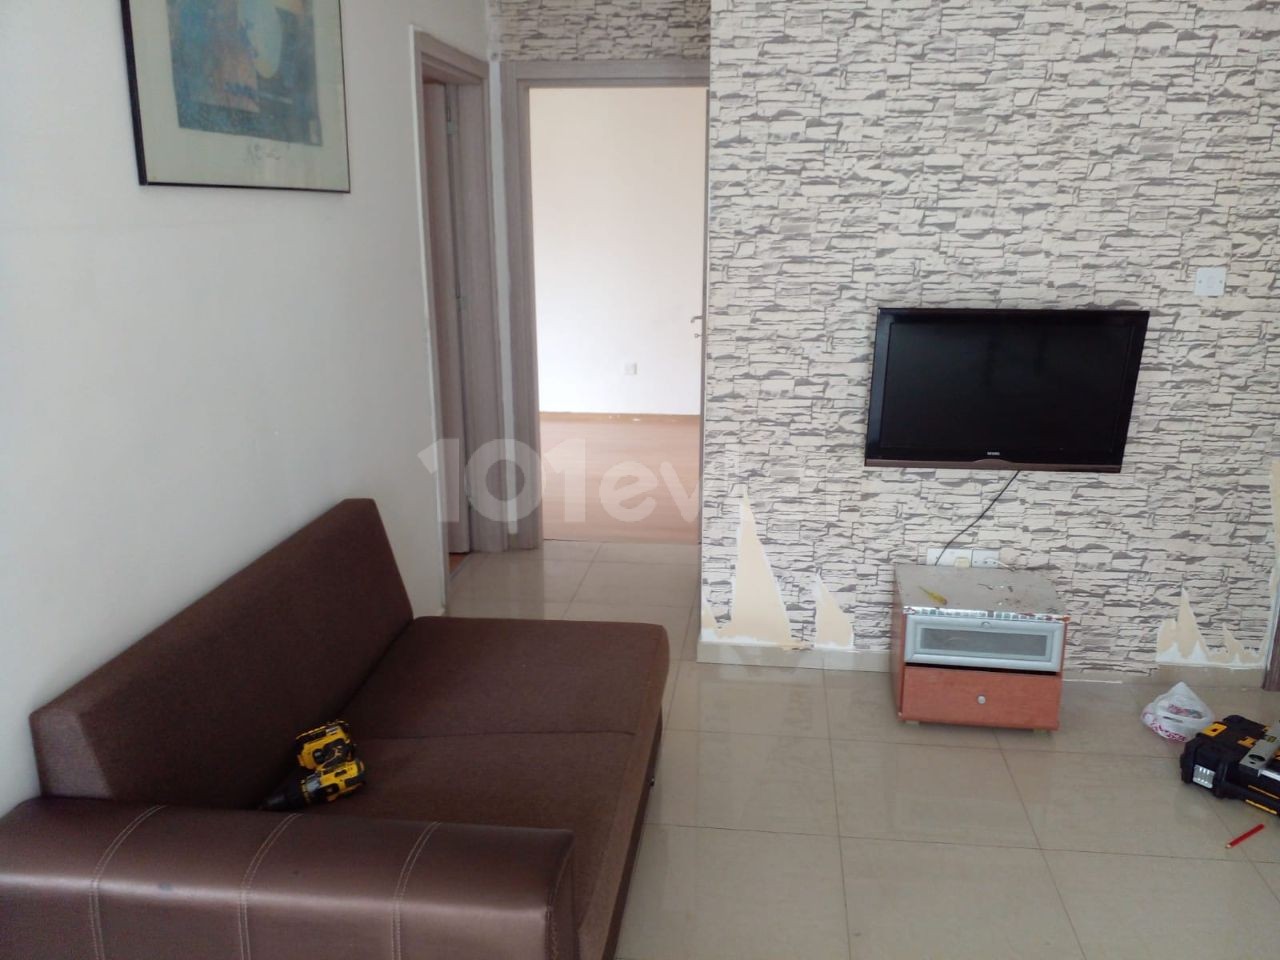 2 +1 FULLY FURNISHED RENTAL APARTMENT IN MITREELI WITH AN ADVANCE PAYMENT OF 4 MONTHS FOR 250 POUNDS STERLING ** 